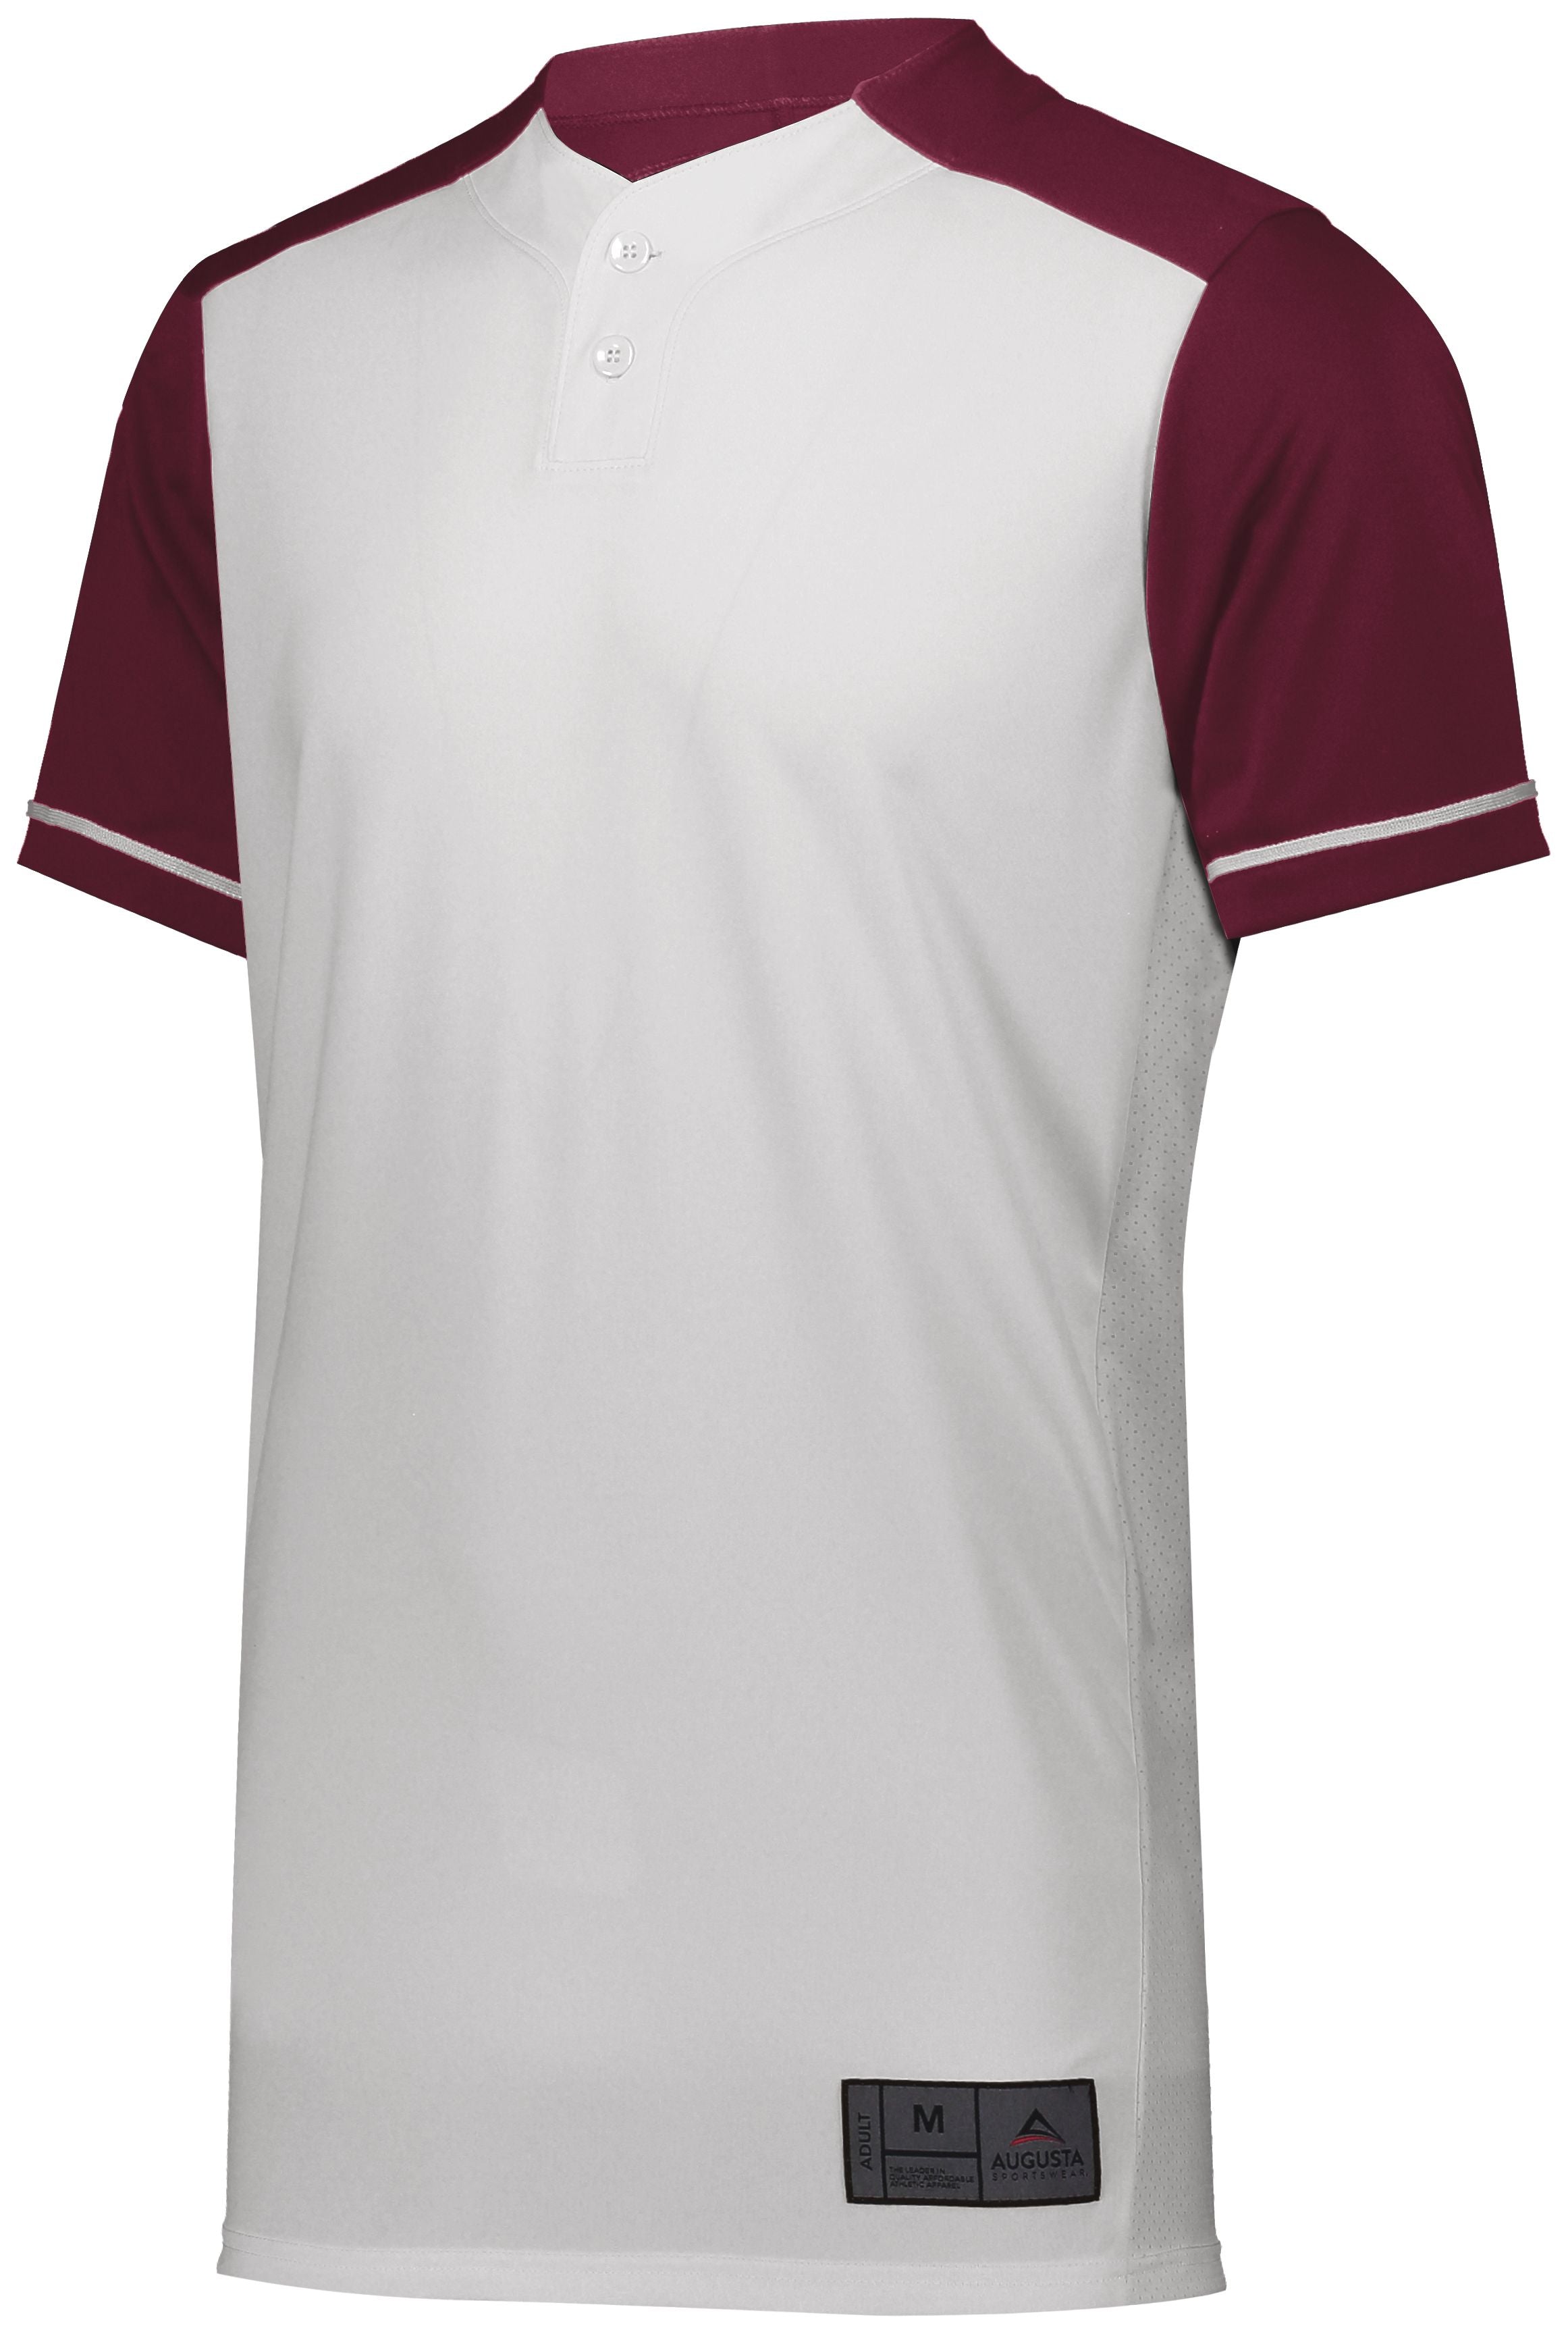 Augusta Sportswear Closer Jersey in White/Maroon  -Part of the Adult, Adult-Jersey, Augusta-Products, Baseball, Shirts, All-Sports, All-Sports-1 product lines at KanaleyCreations.com